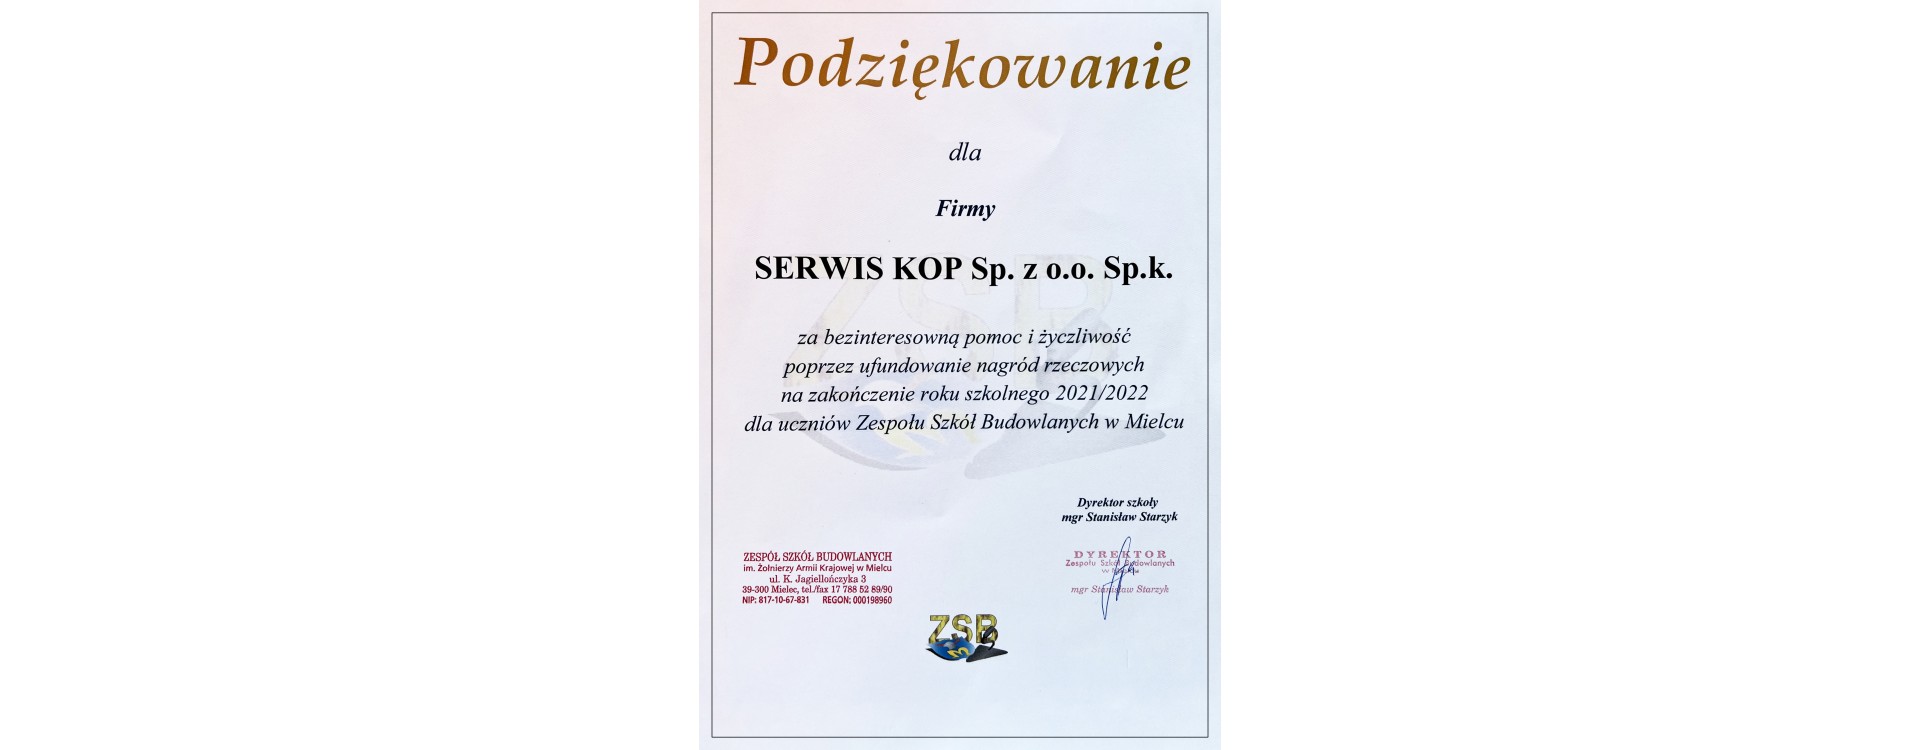 Special thanks to the company Serwis Kop